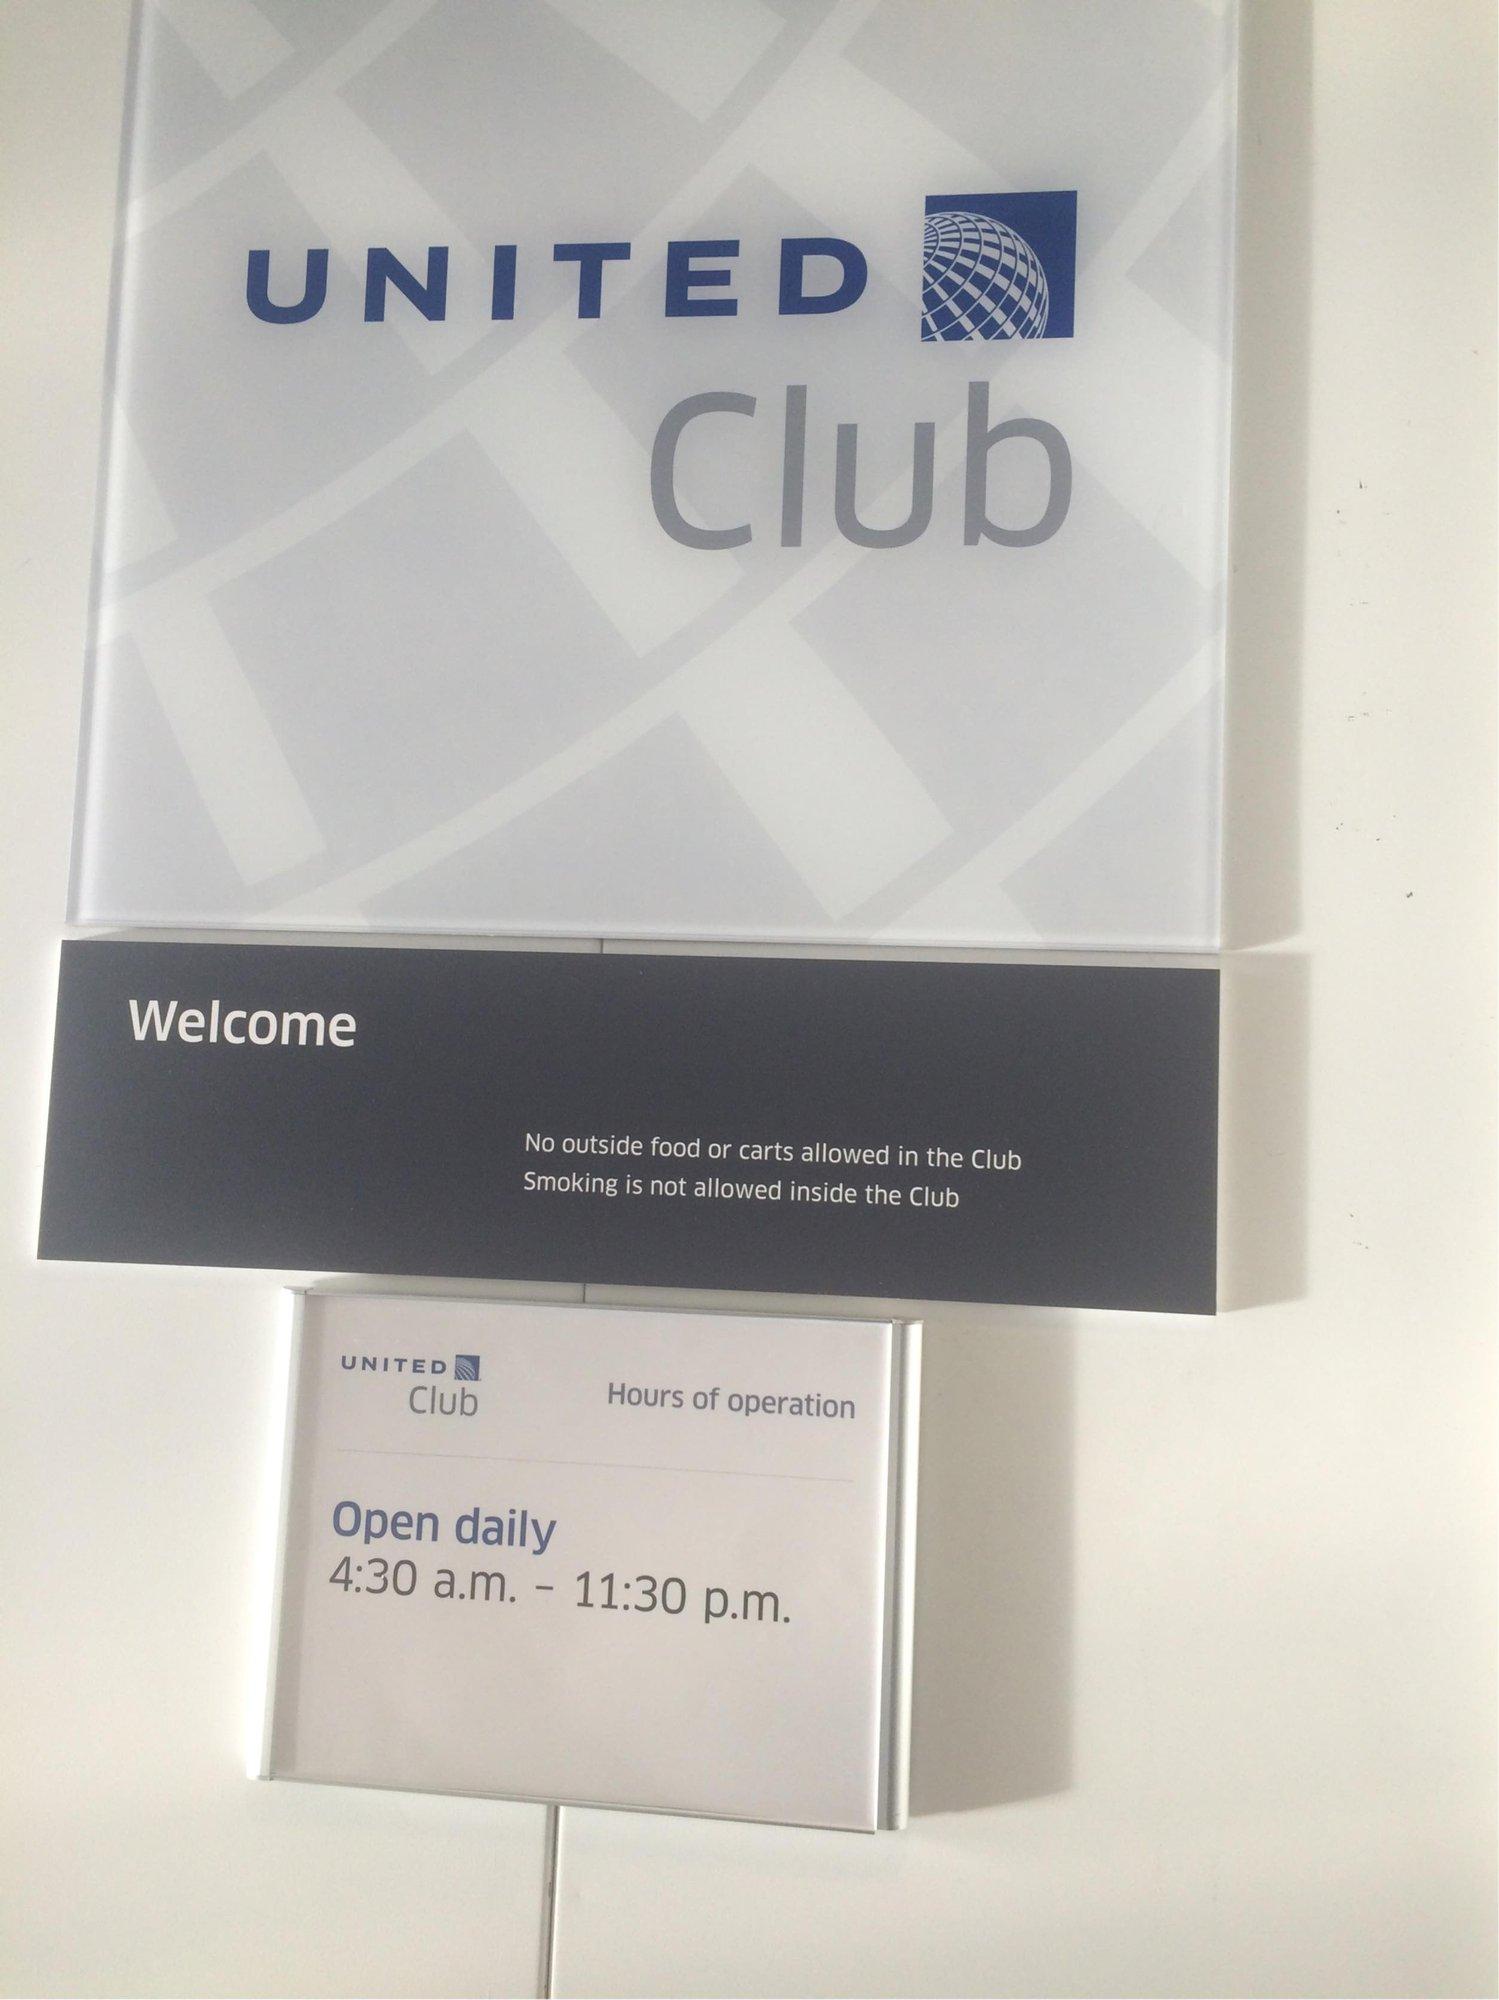 United Airlines United Club image 23 of 57